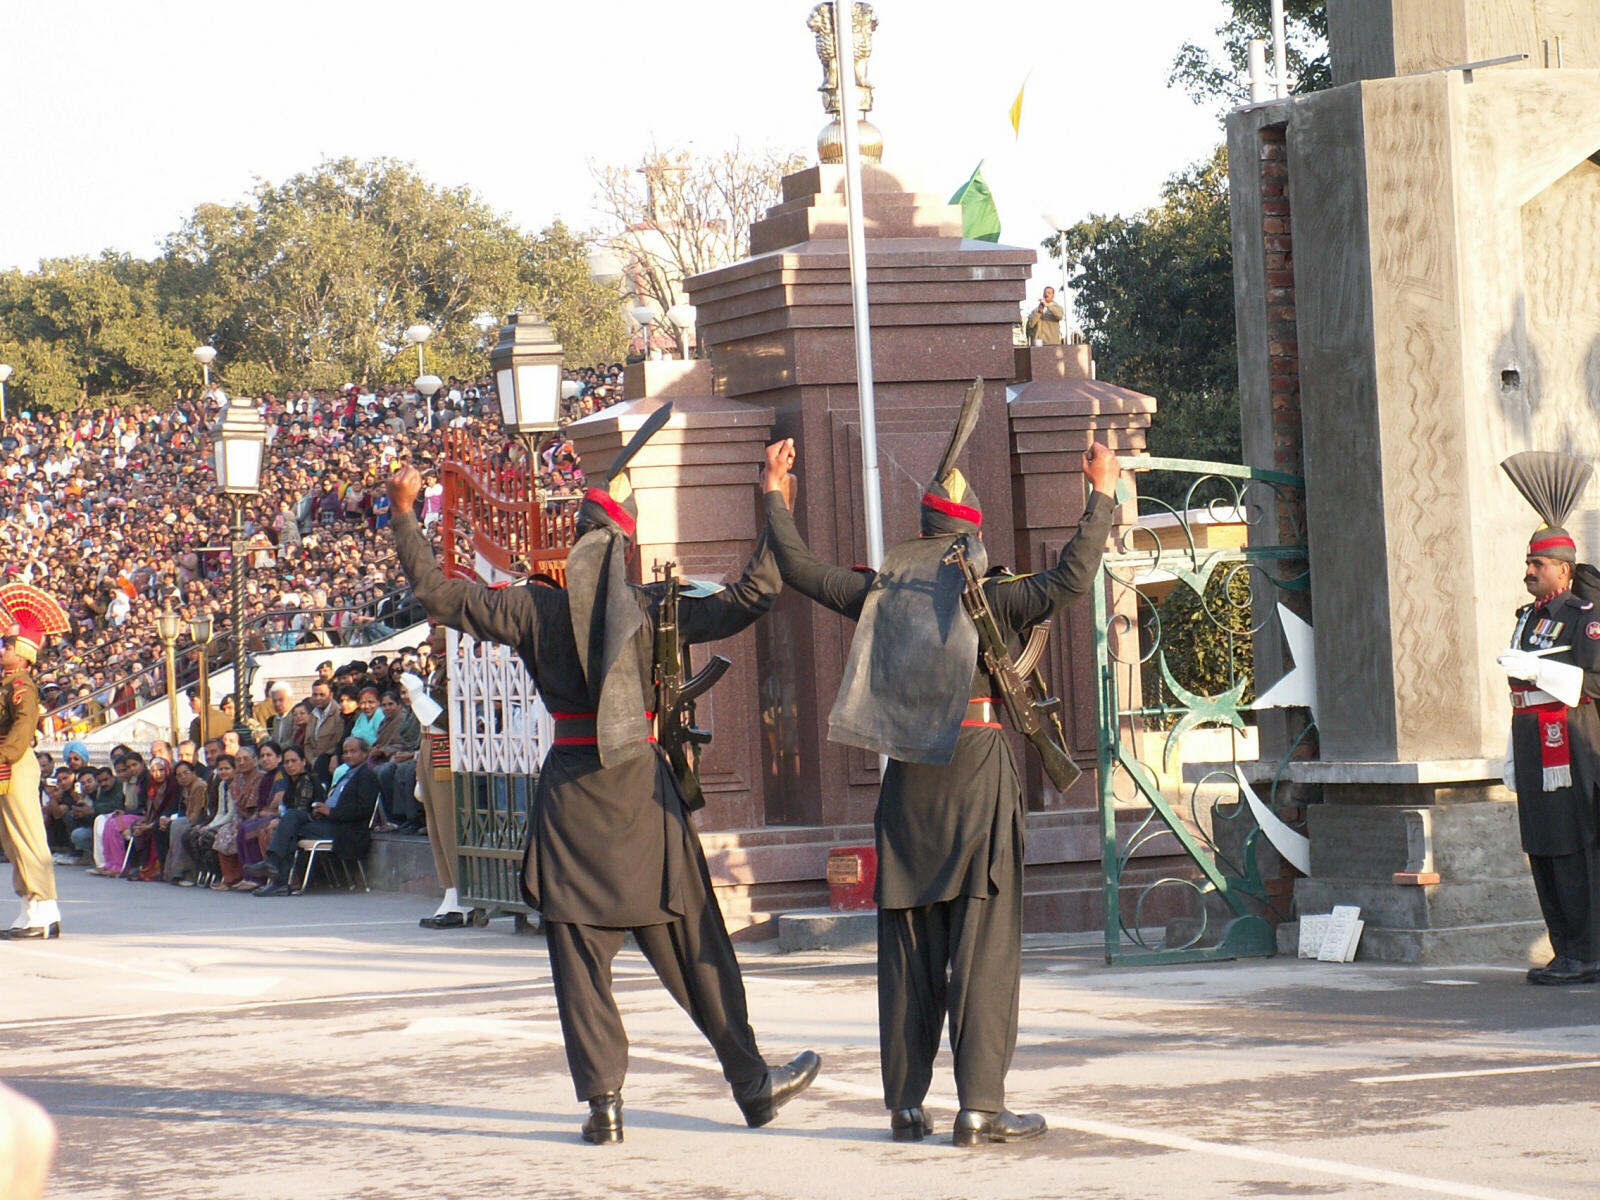 The closing ceremony at the Wagah border, Pakistan side